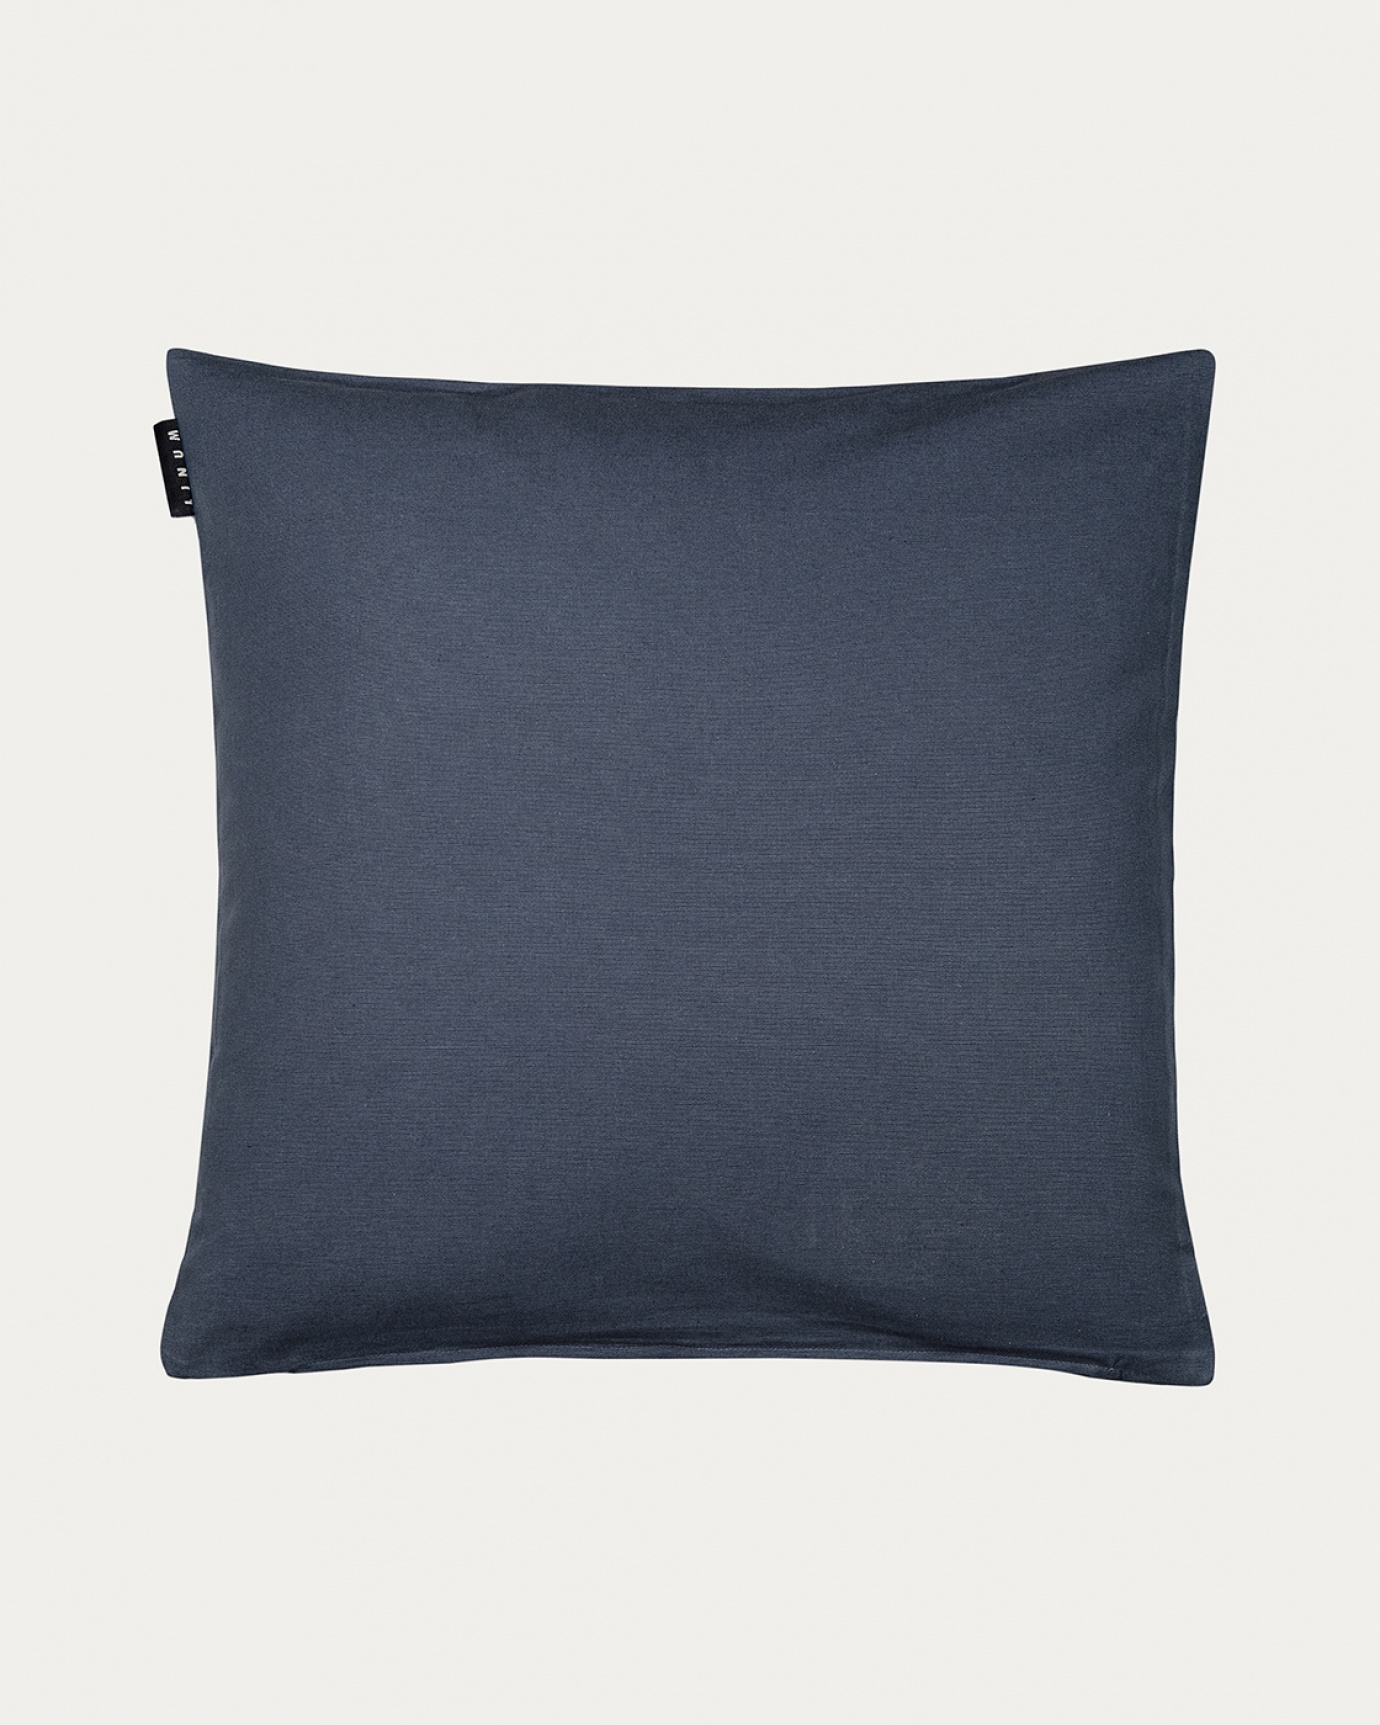 Product image dark steel blue ANNABELL cushion cover made of soft cotton from LINUM DESIGN. Size 50x50 cm.